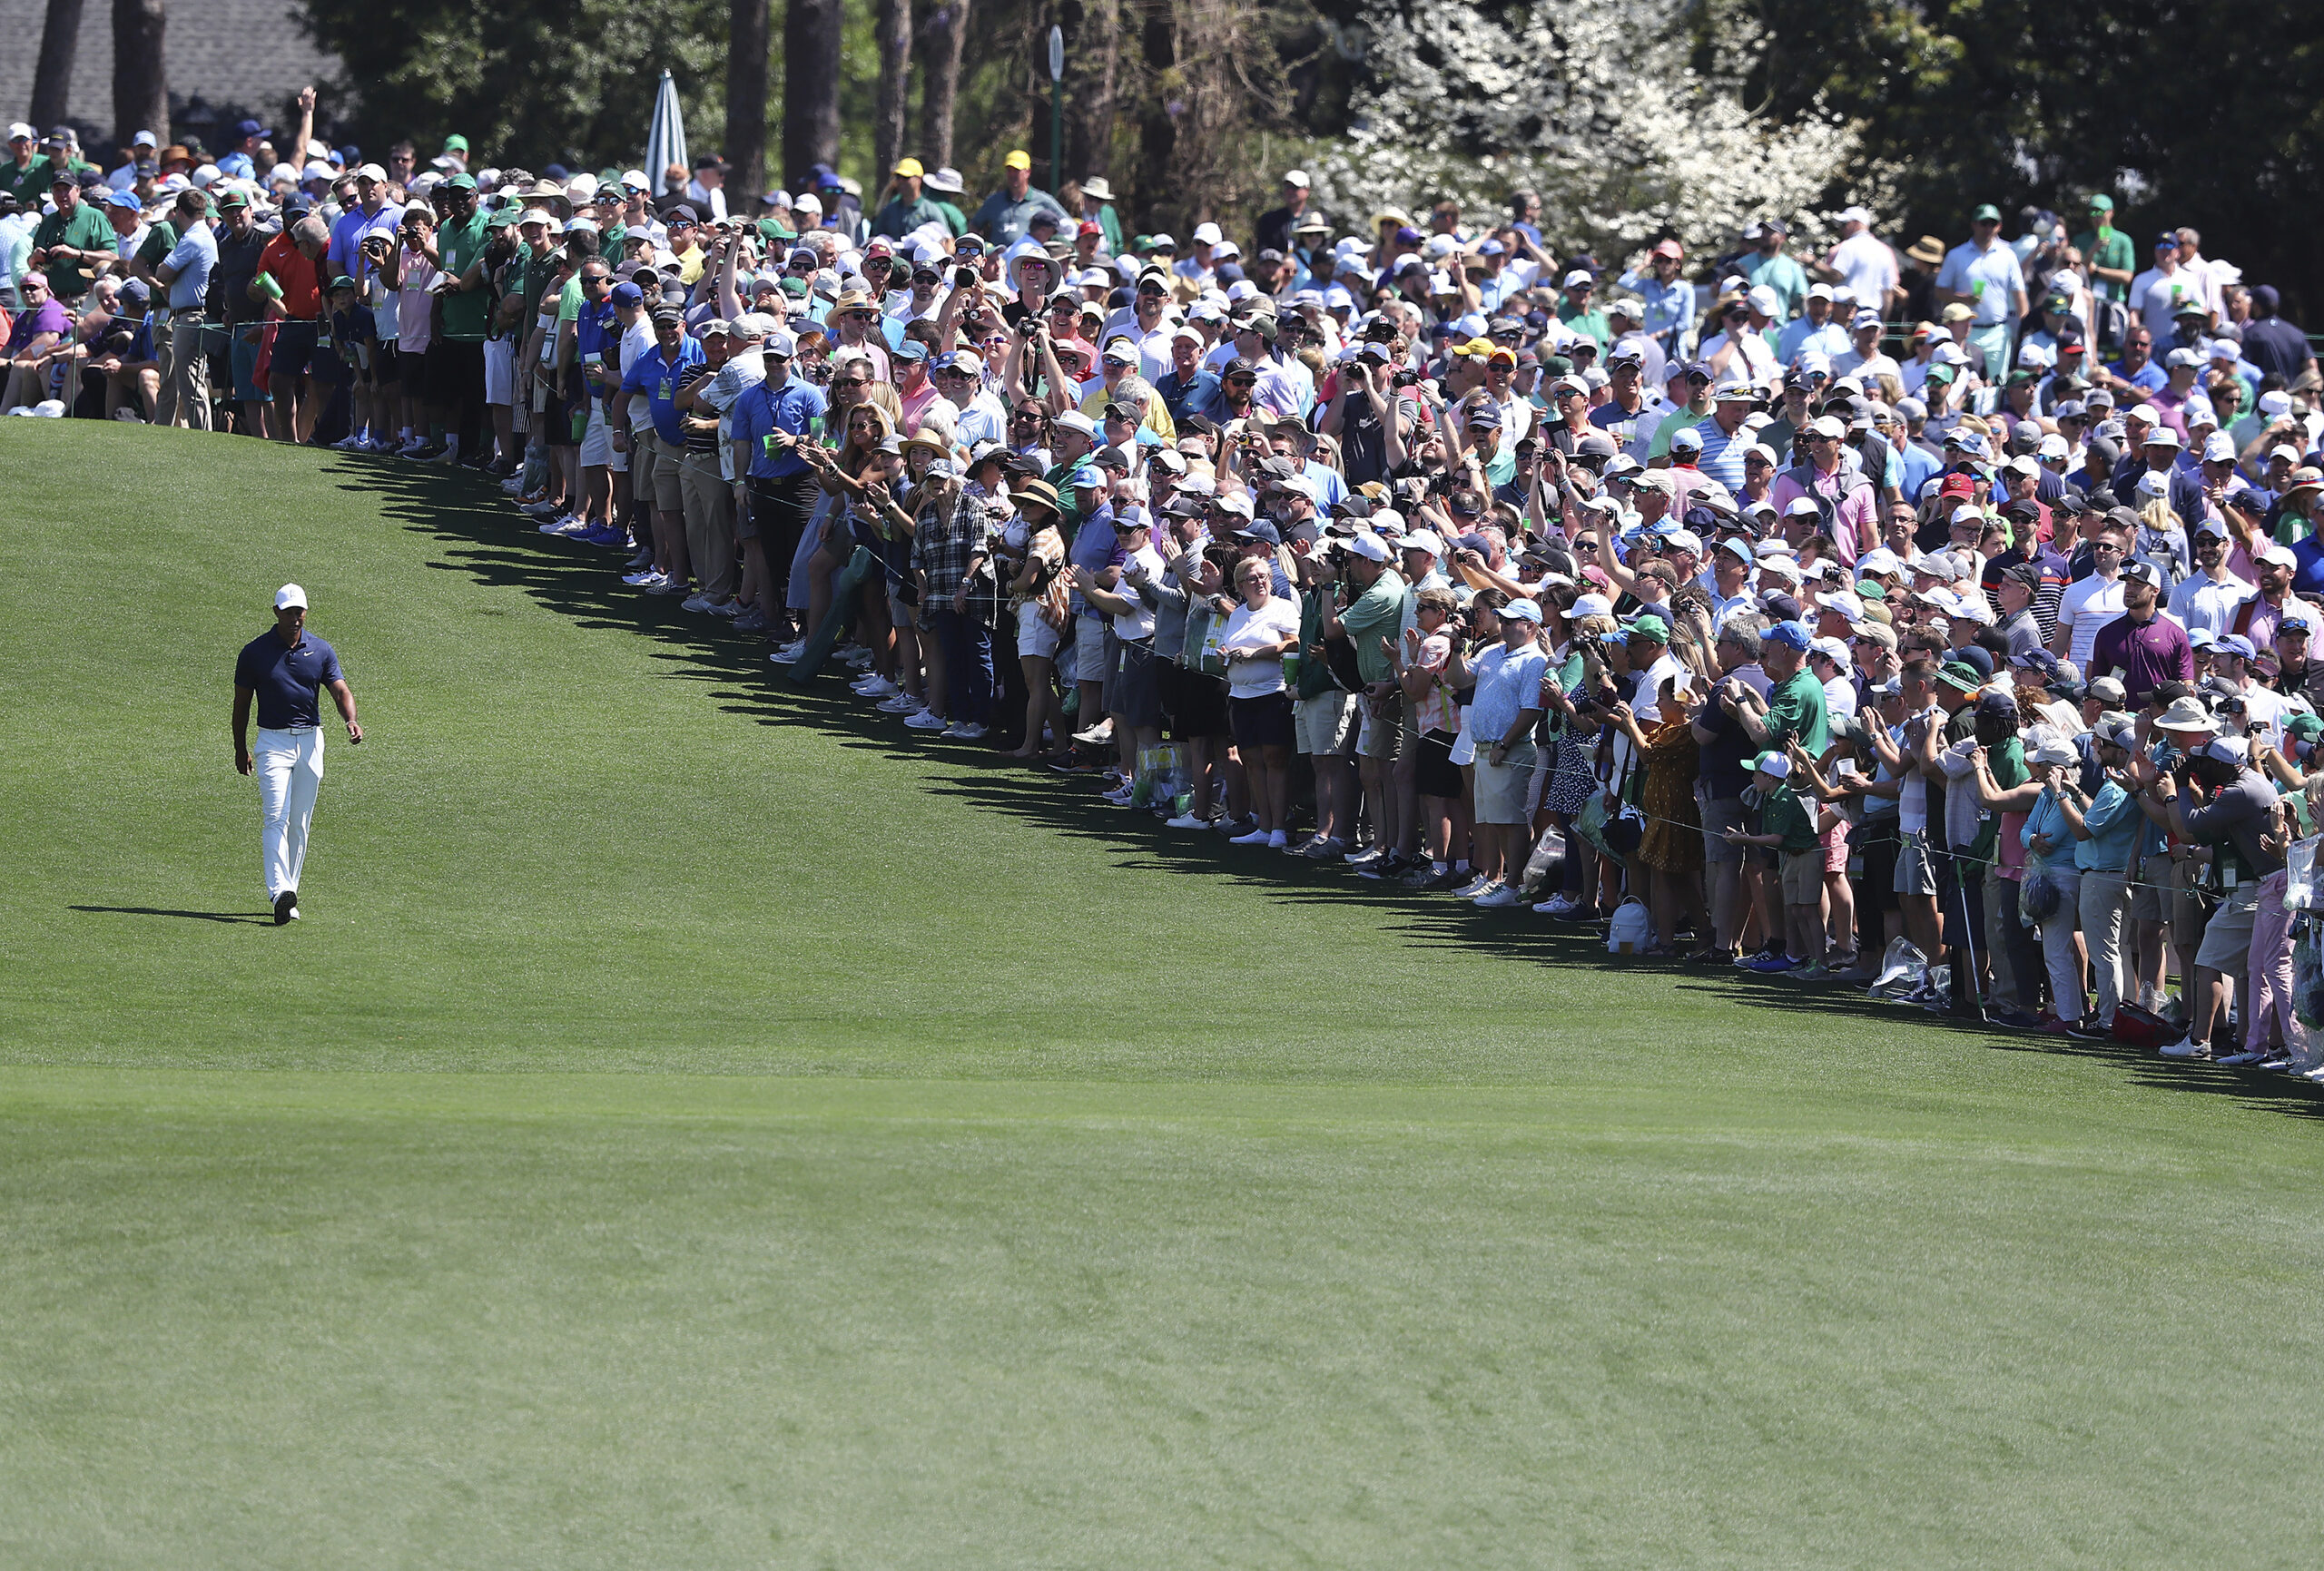 The giant gallery of patrons following five-time Masters champion Tiger Woods applaude as he walks down the first fairway after teeing off to begin his practice round for the Masters at Augusta National Golf Club in Augusta, Ga., Monday, April 4, 2022. (Curtis Compton /Atlanta Journal-Constitution via AP)